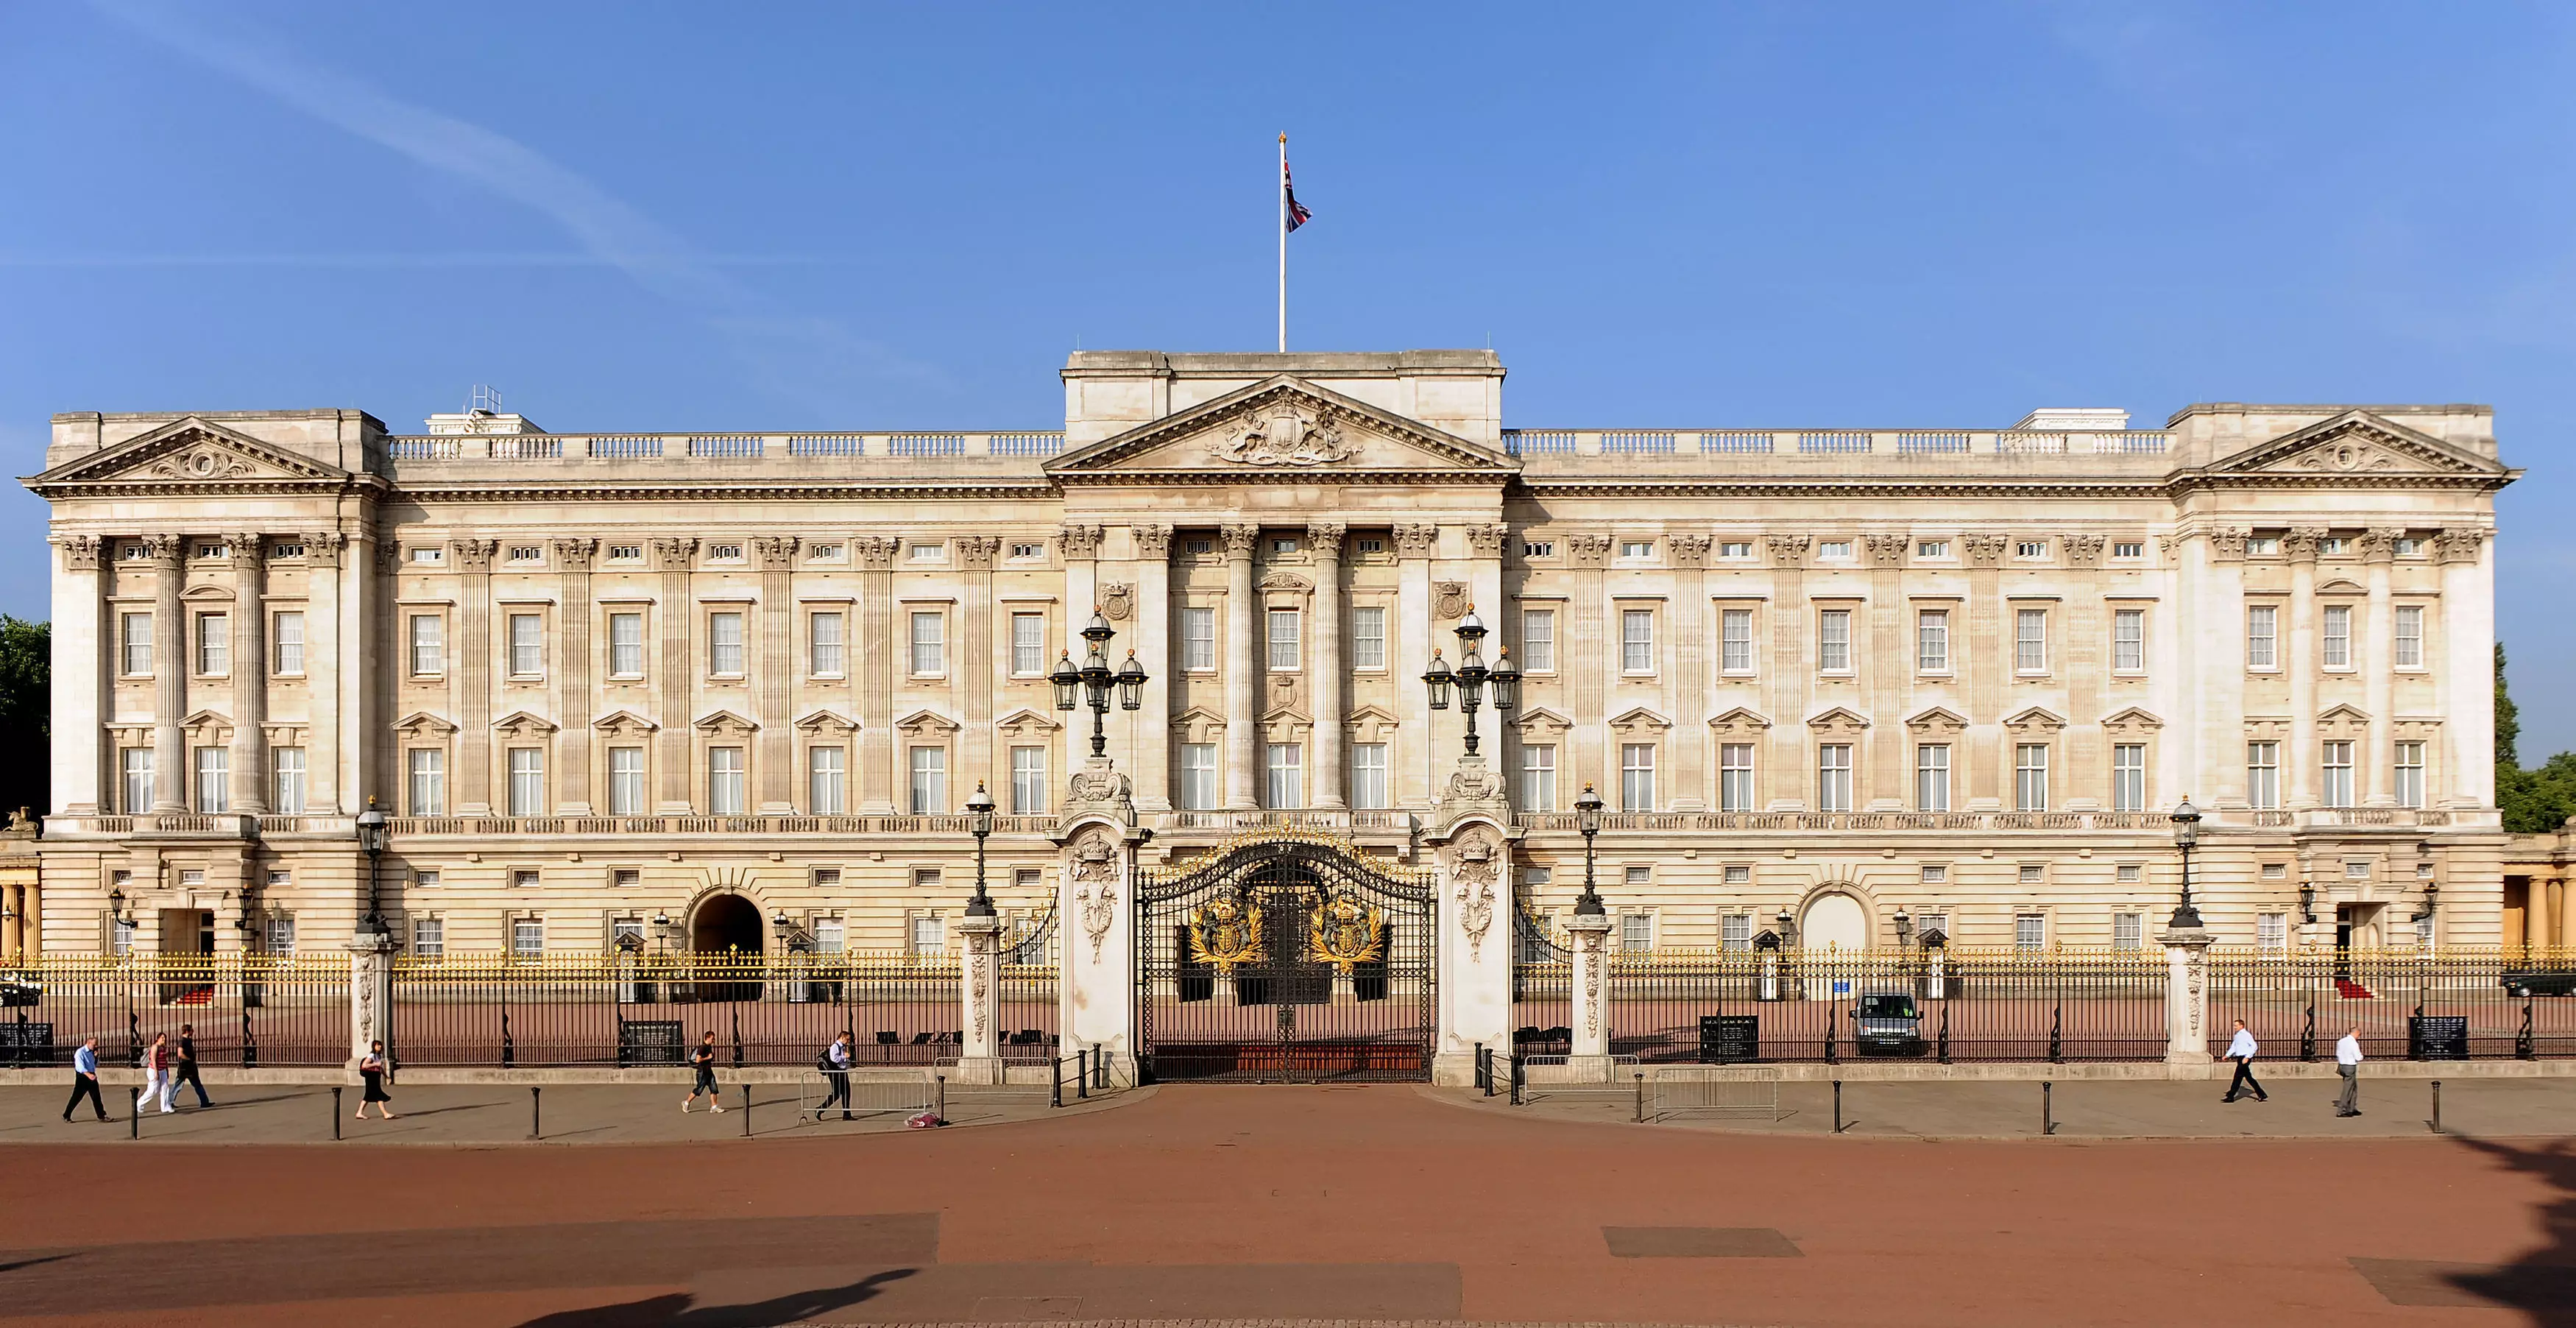 You could also be based at Buckingham Palace (